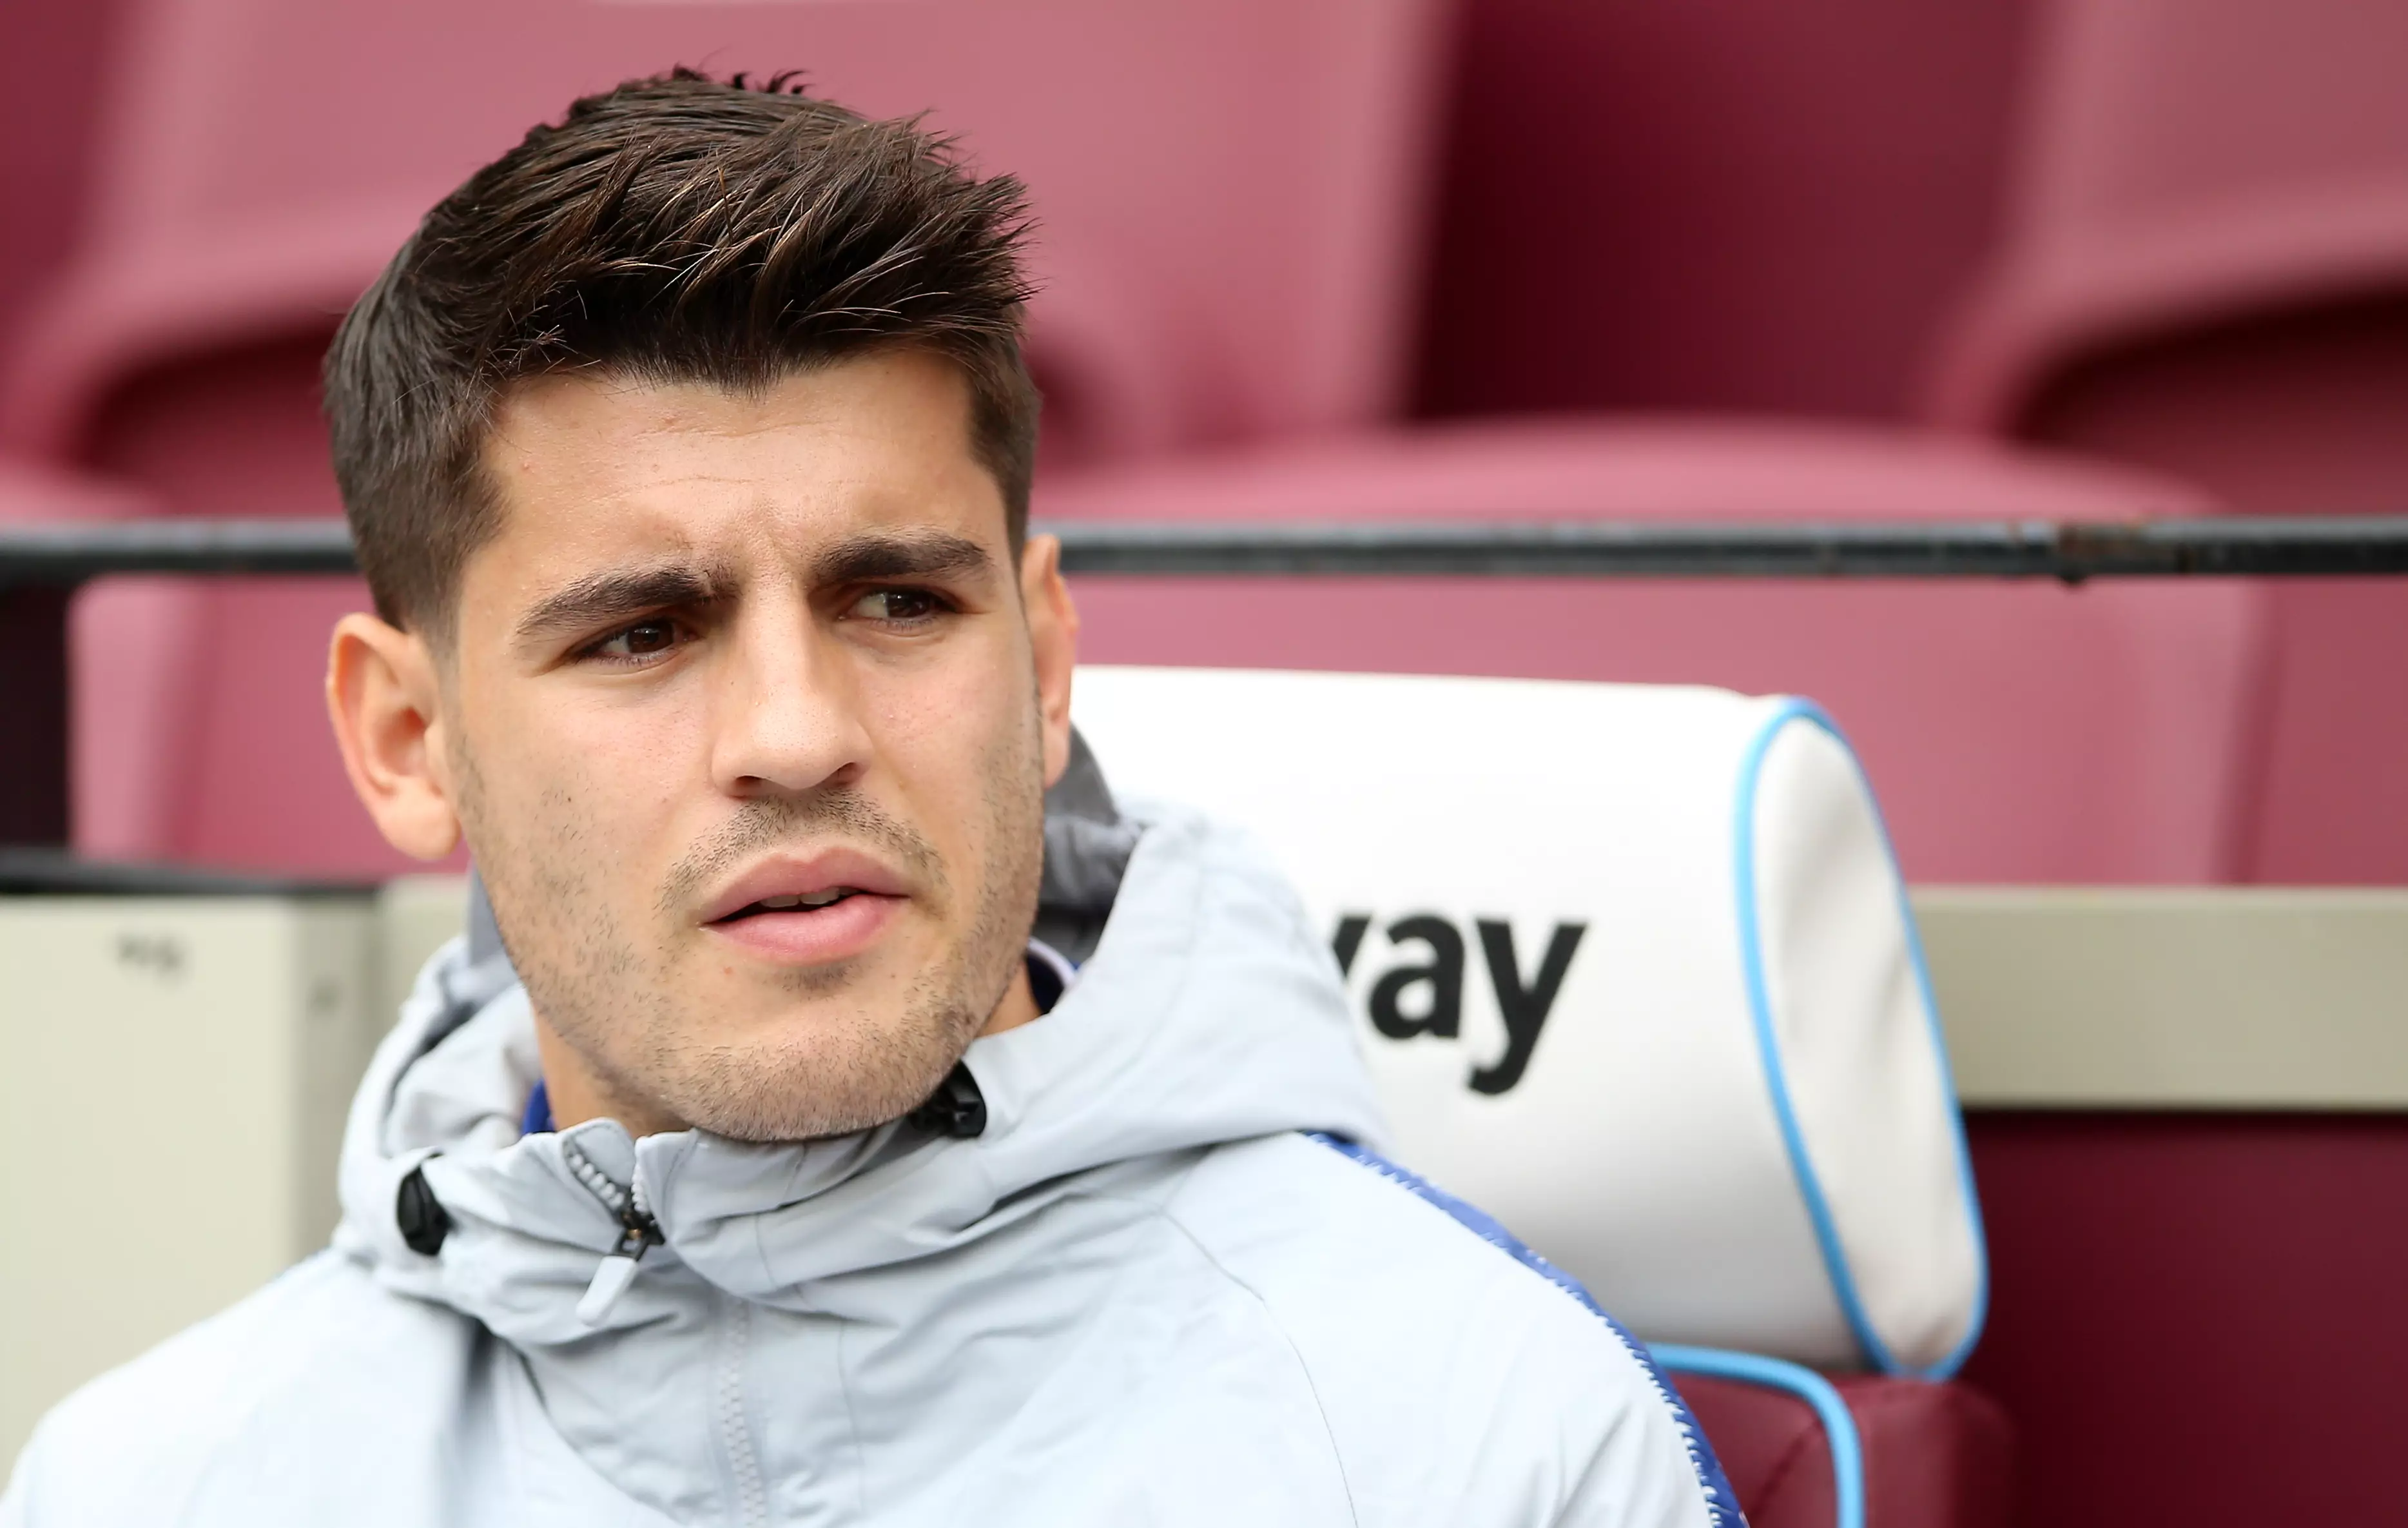 Morata has spent quite a bit of time on the bench recently. Image: PA Images